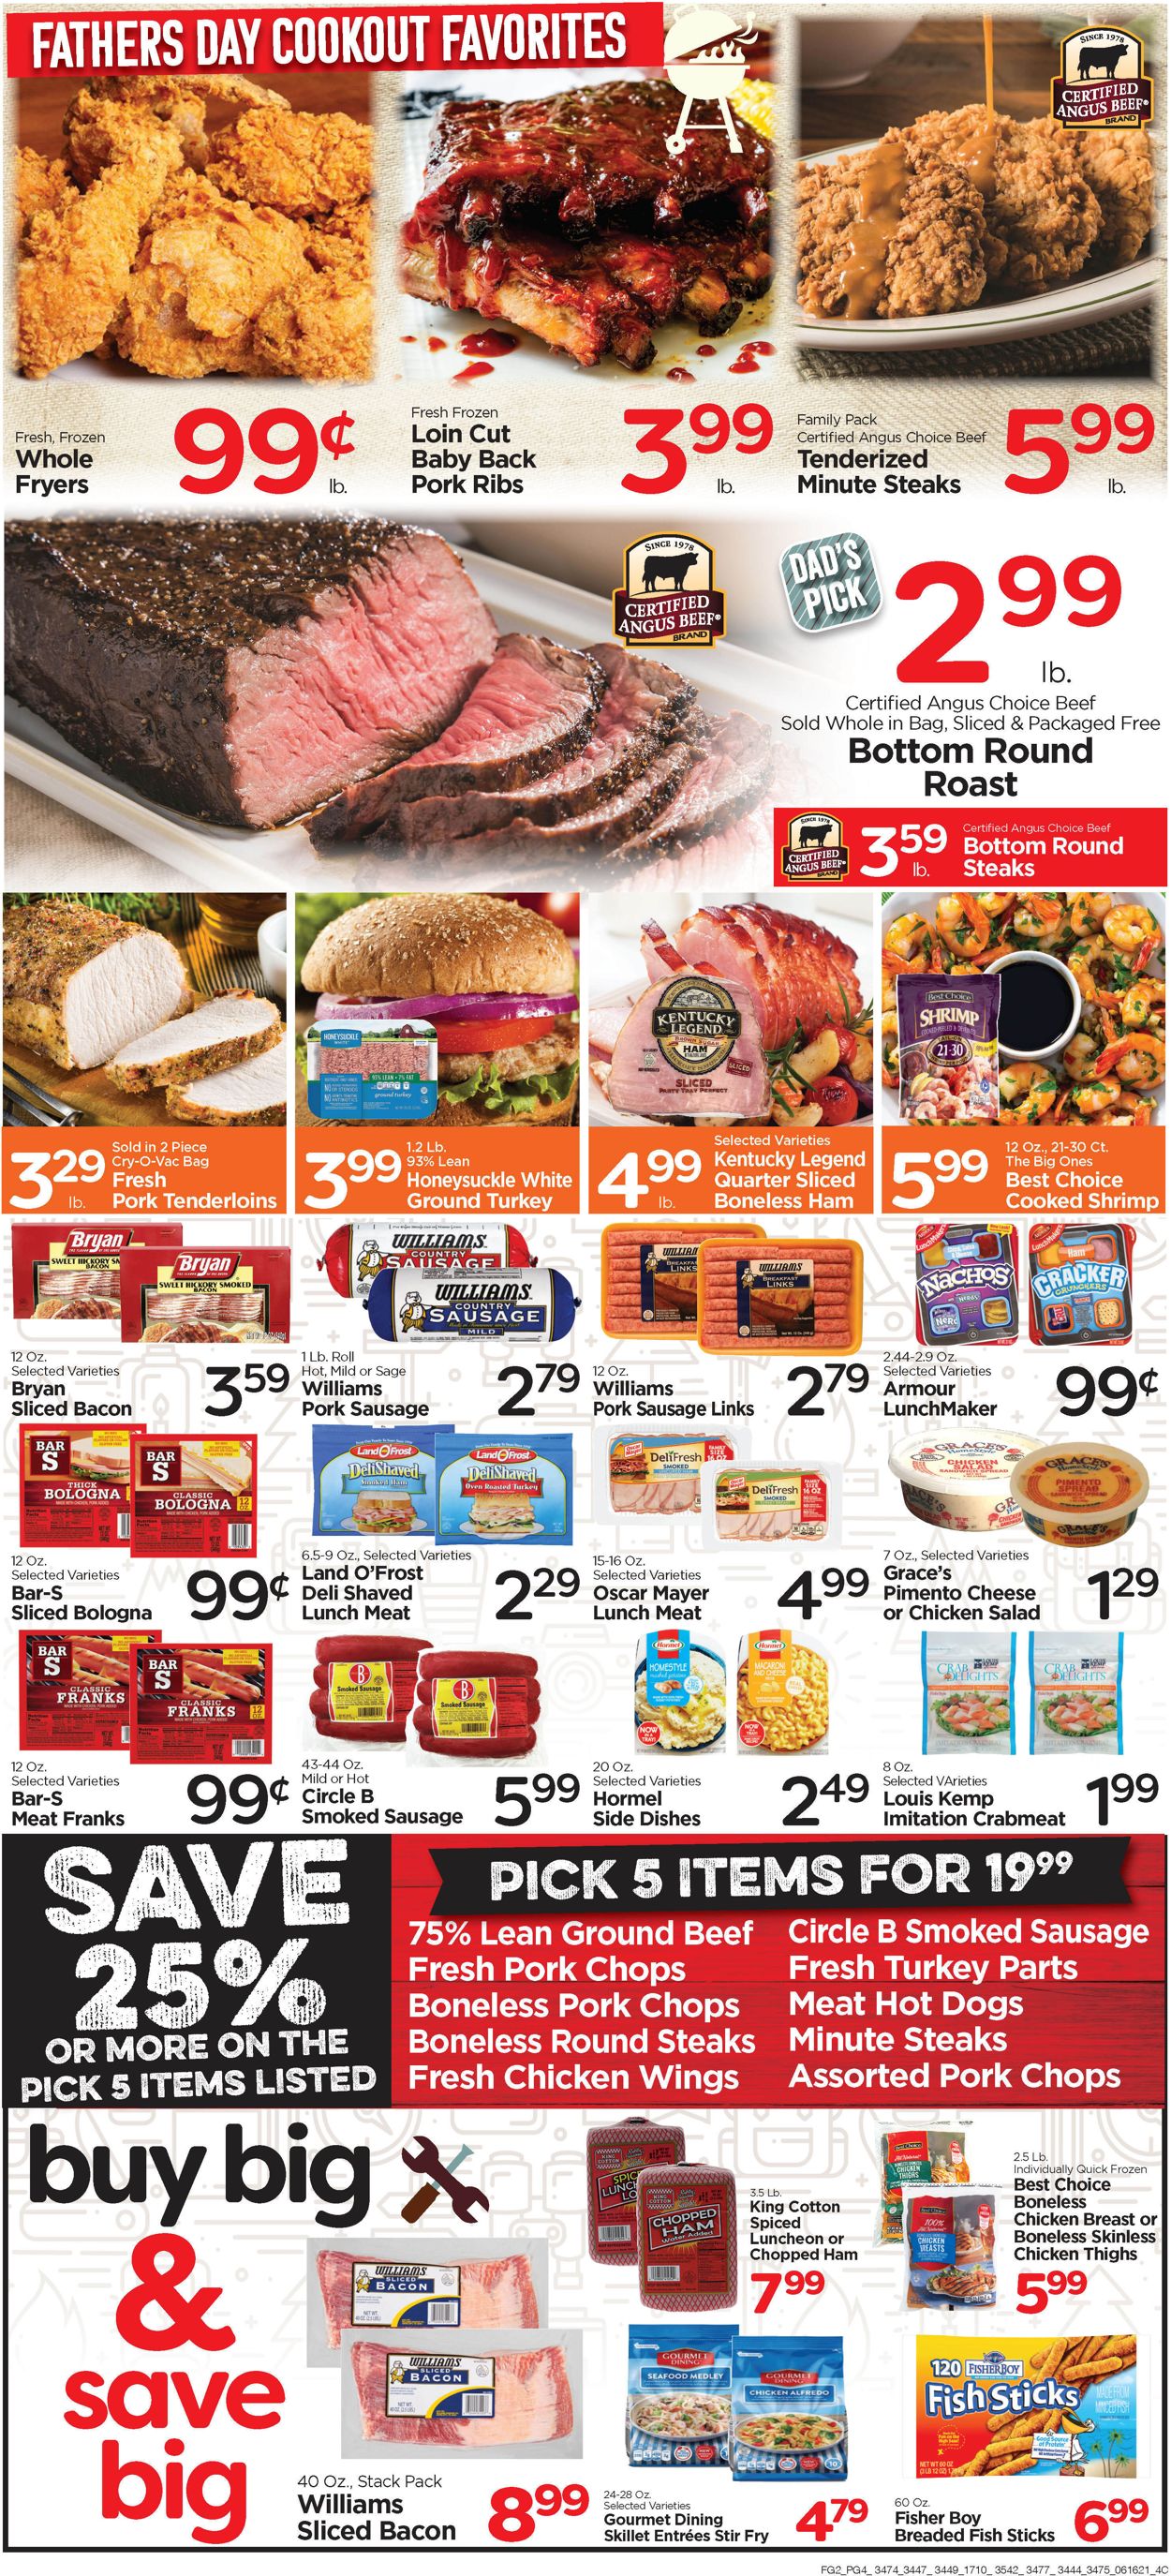 Catalogue Edwards Food Giant from 06/16/2021